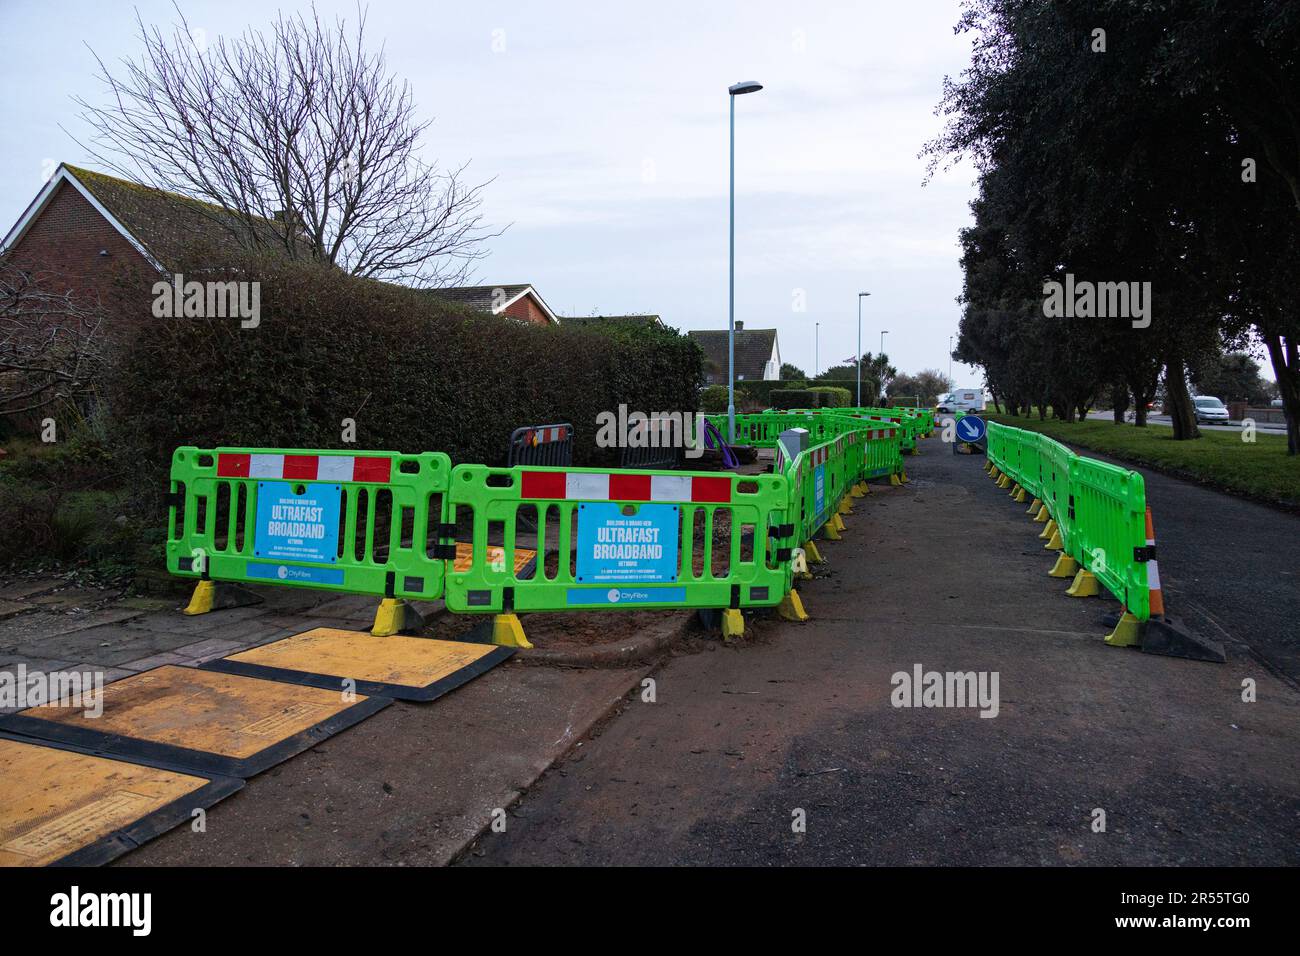 barriers around construction work on the pavement when laying new ultrafast broadband cables in Worthing, UK Stock Photo